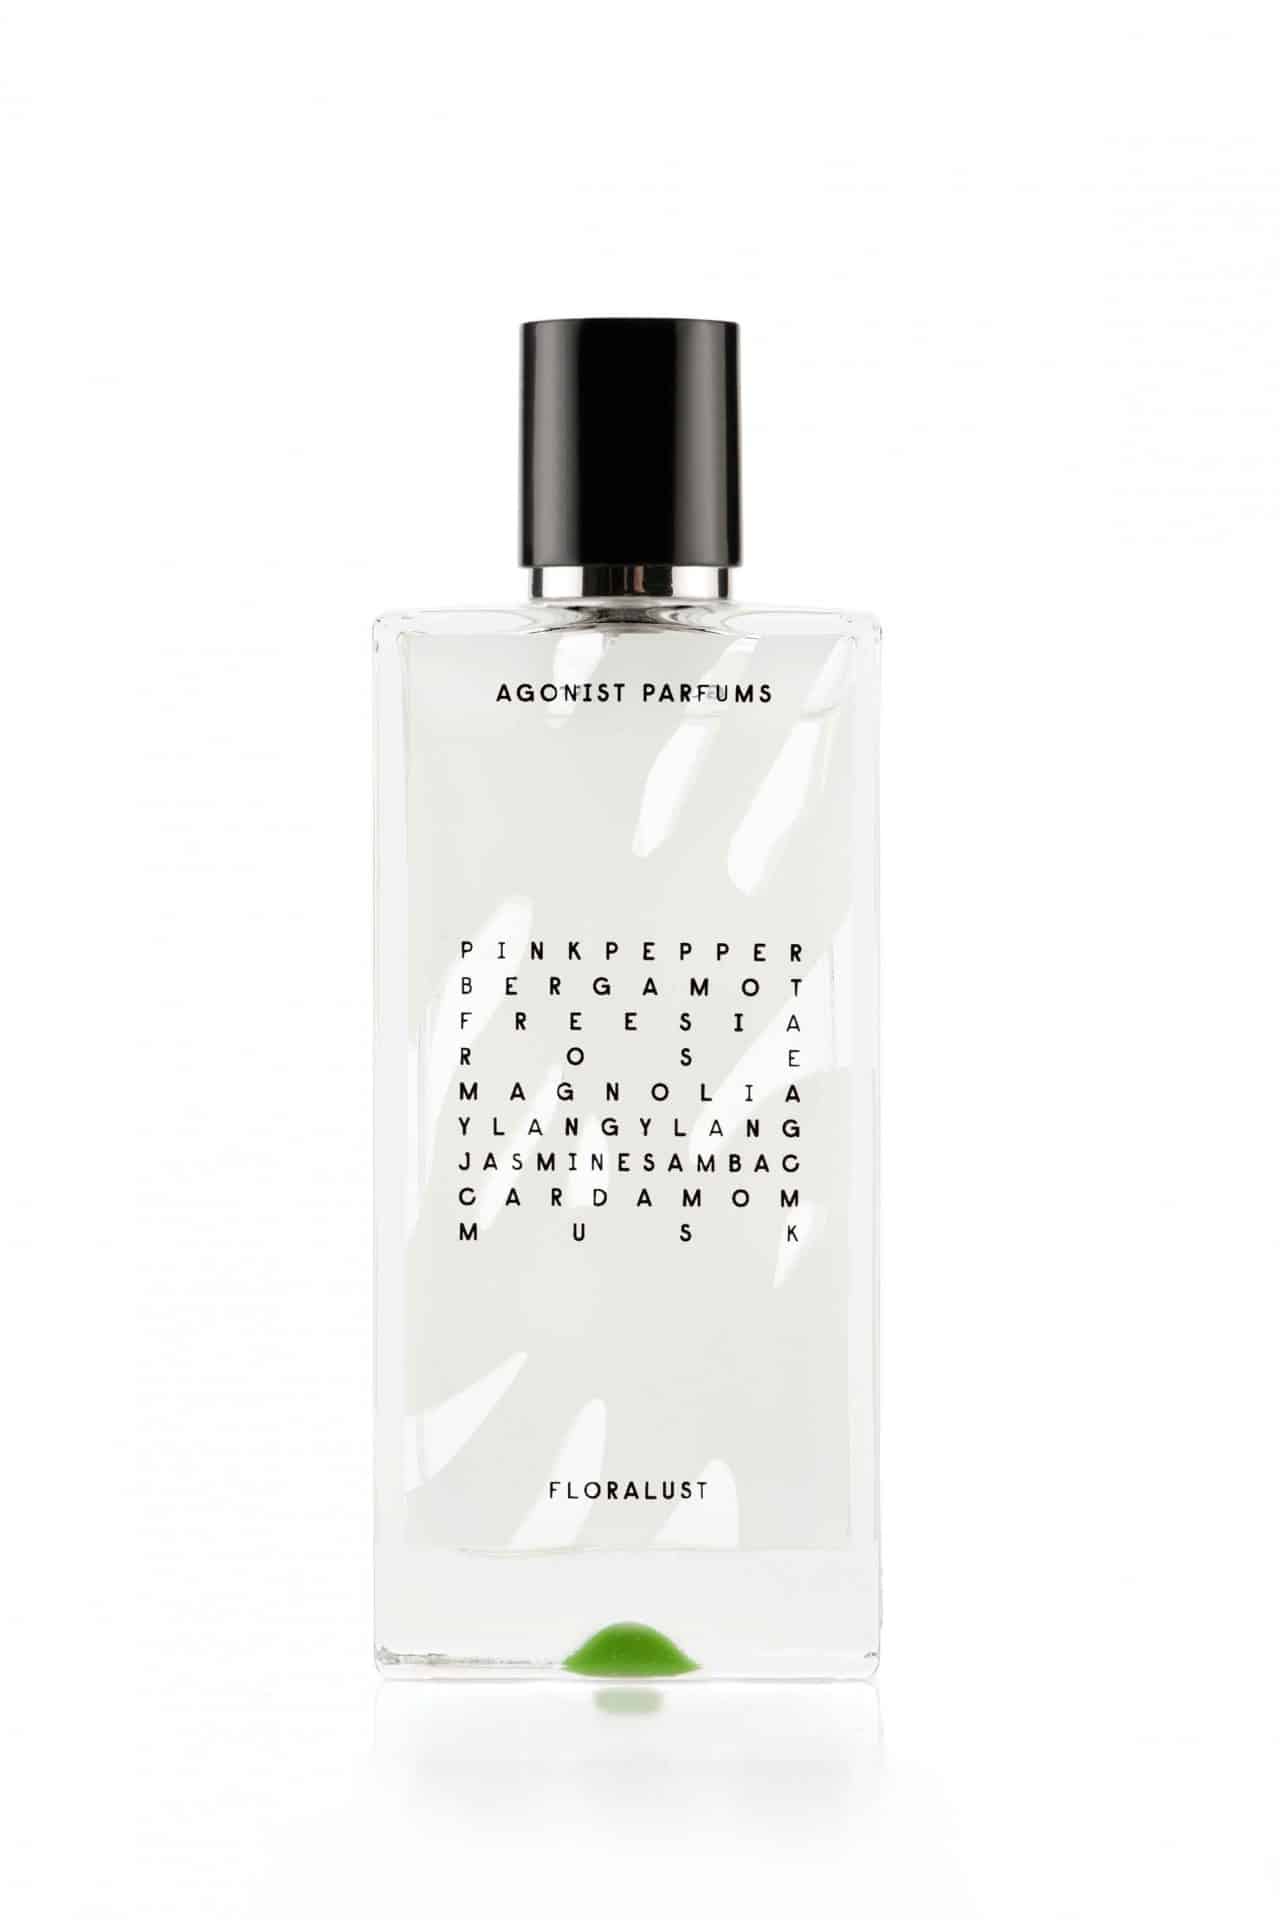 FLORALUST by Agonist, £115/50 ml, www.averyperfumegallery.co.uk 